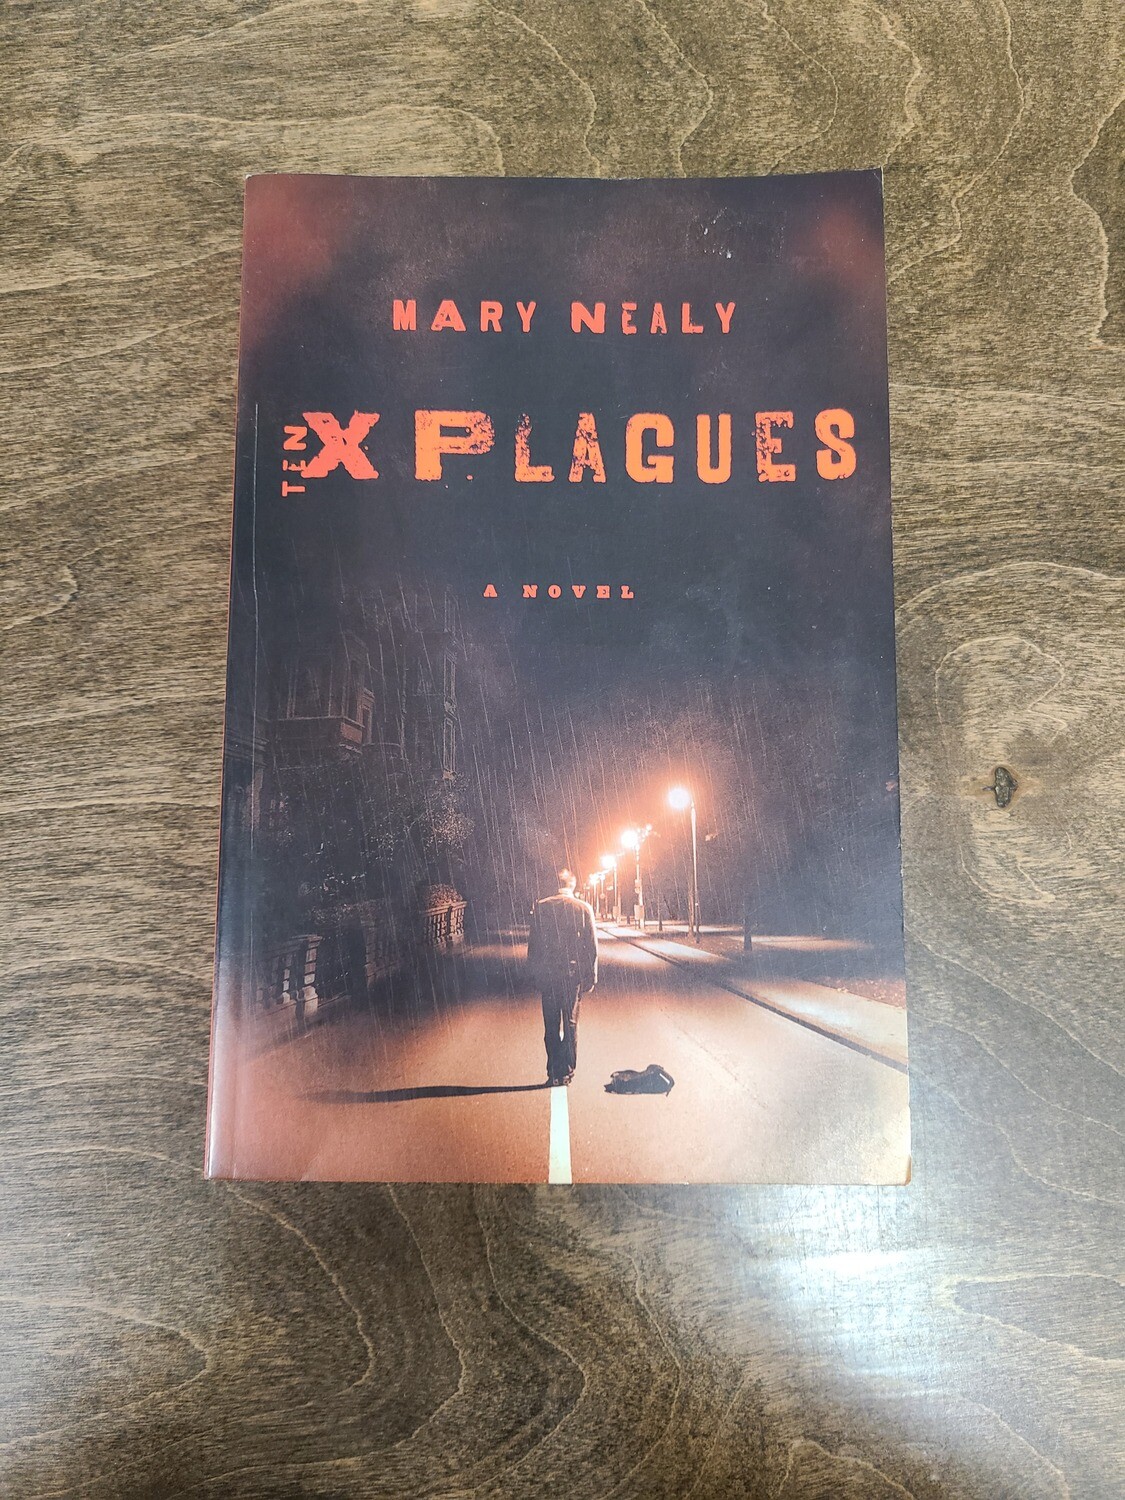 Ten Plagues by Mary Nealy